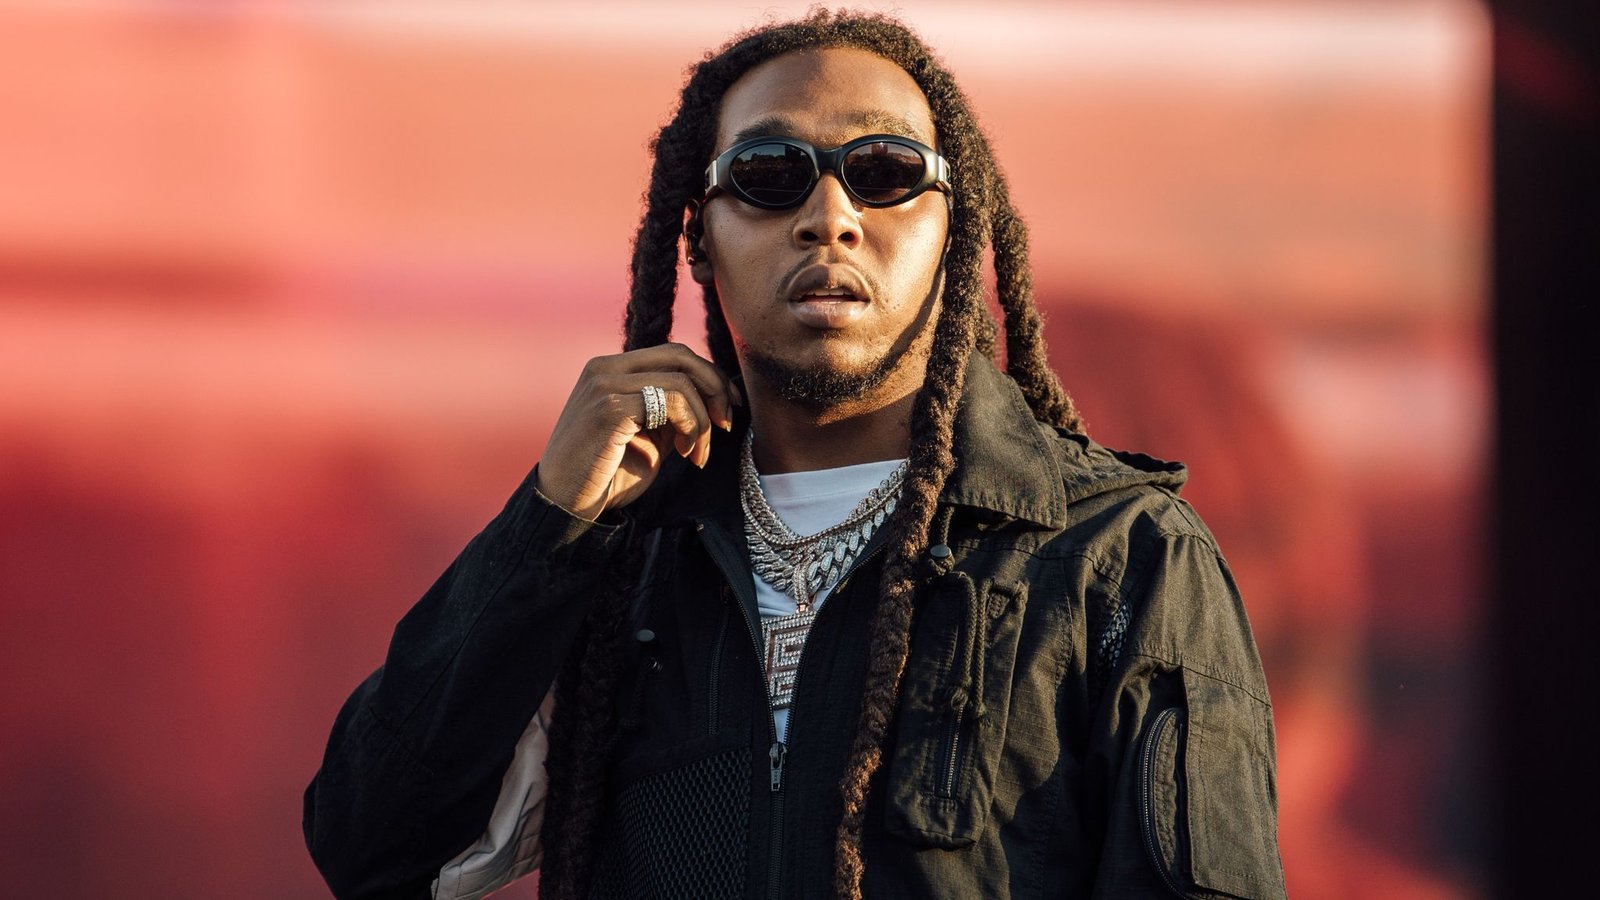 Rapper Takeoff from the Migos, Kirshnik Khari Ball, Shot at Party in Houston and Now Deceased